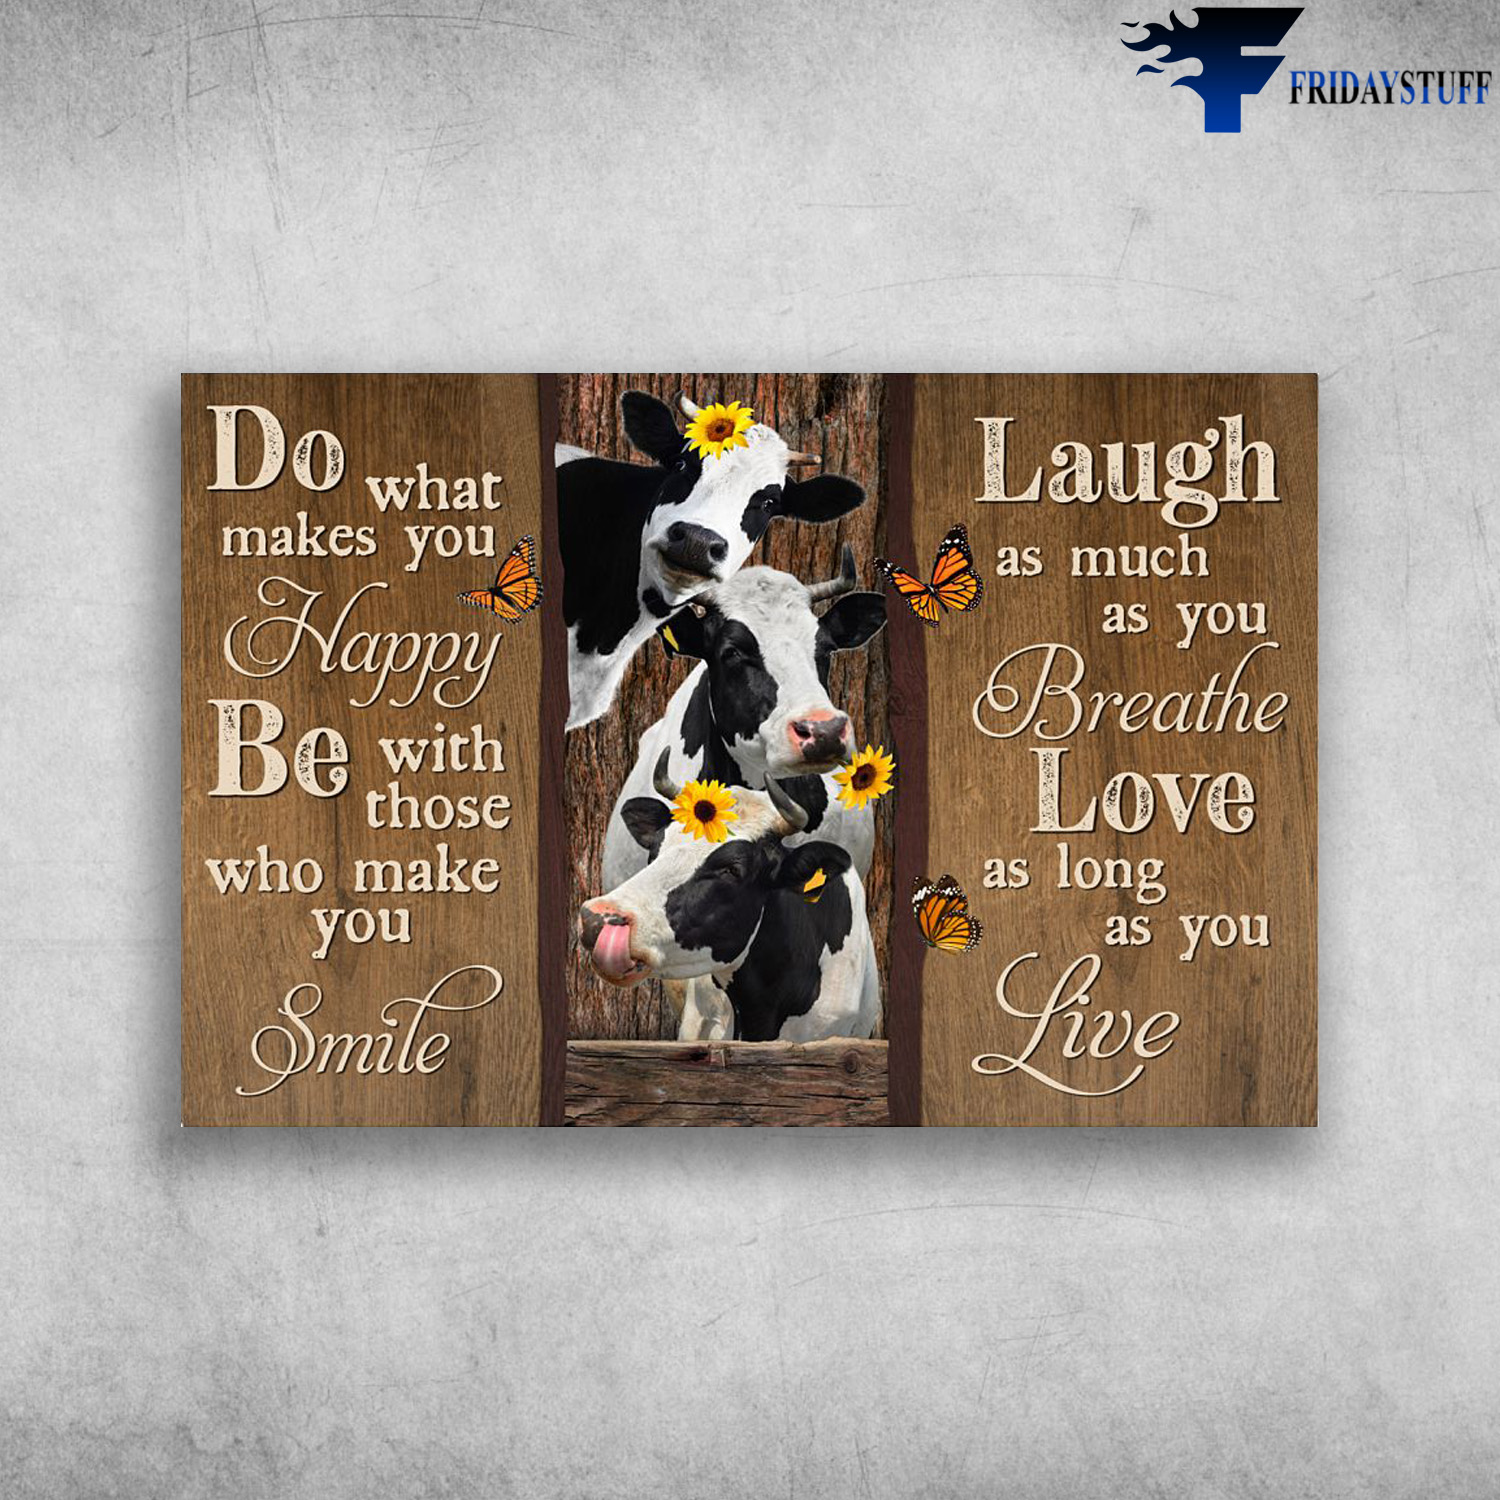 Dairy Cows - Do What Makes You Happy, Be With Those Who Make You Smile, Laugh As Much As You Breathe, Love As Long As You Live